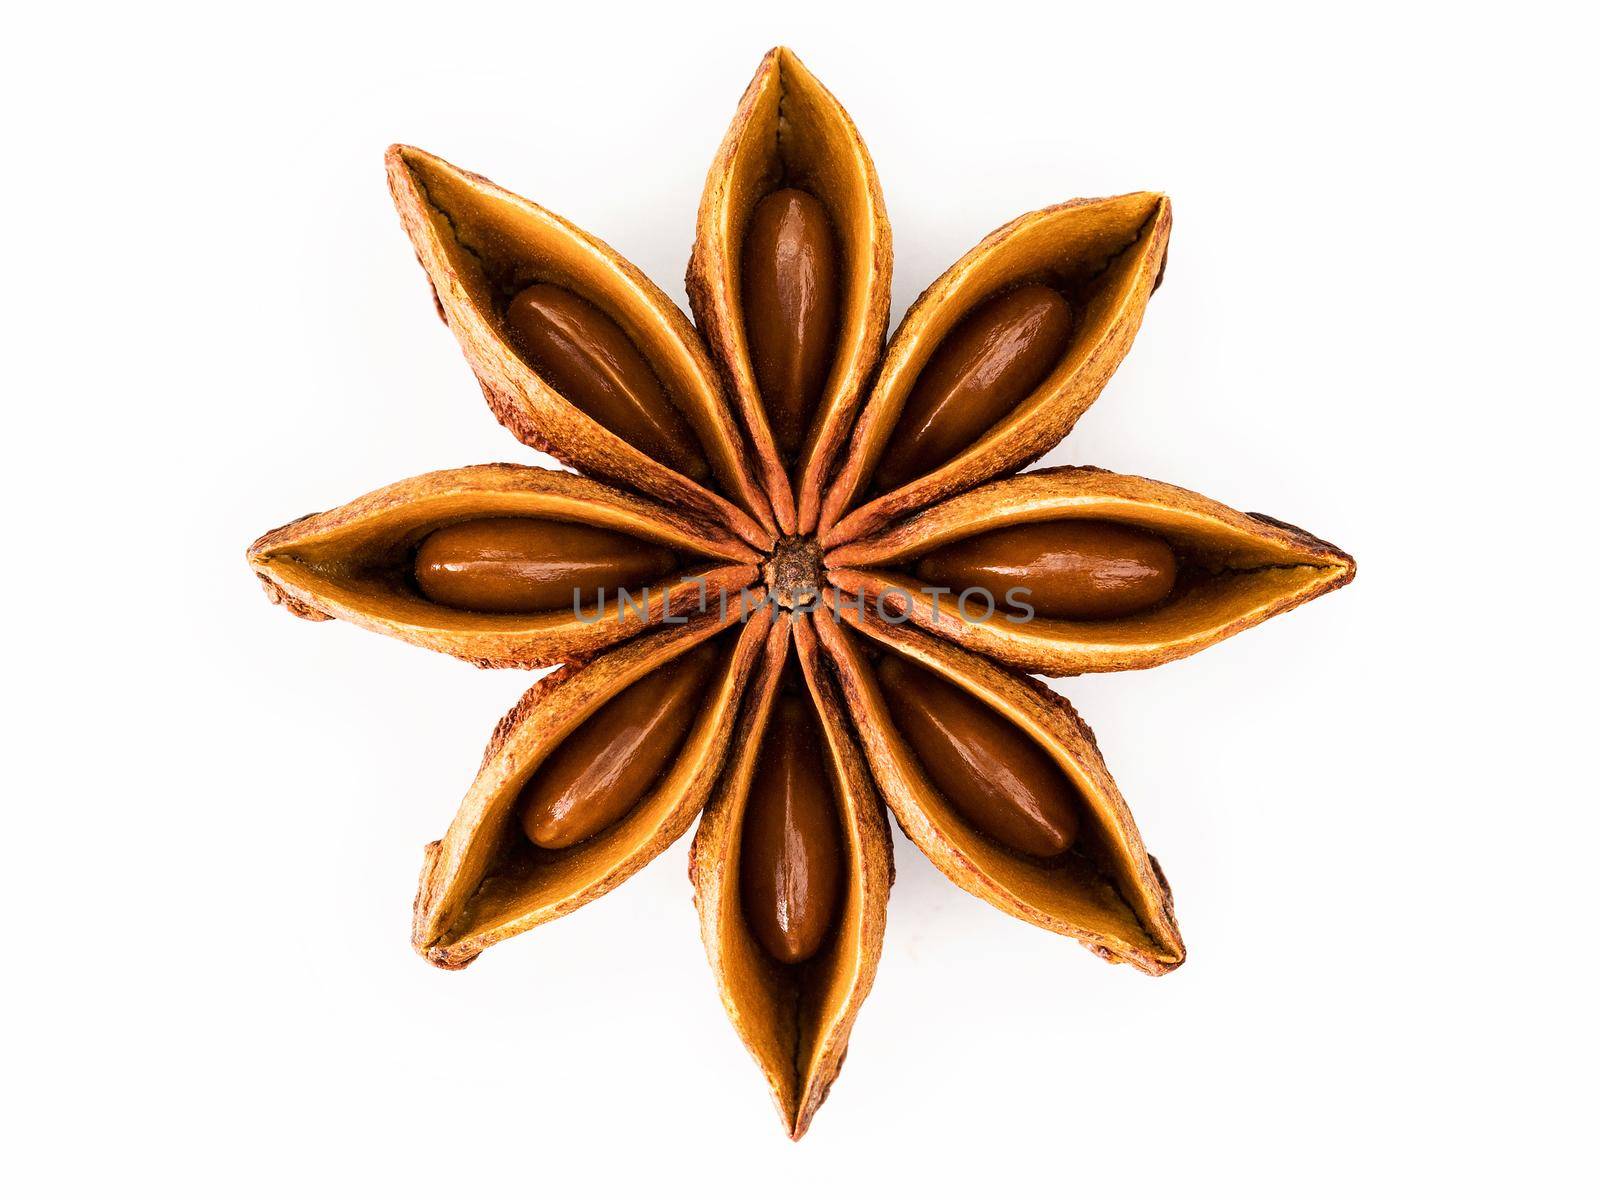 Single Chinese star anise  isolated on white background. by kerdkanno